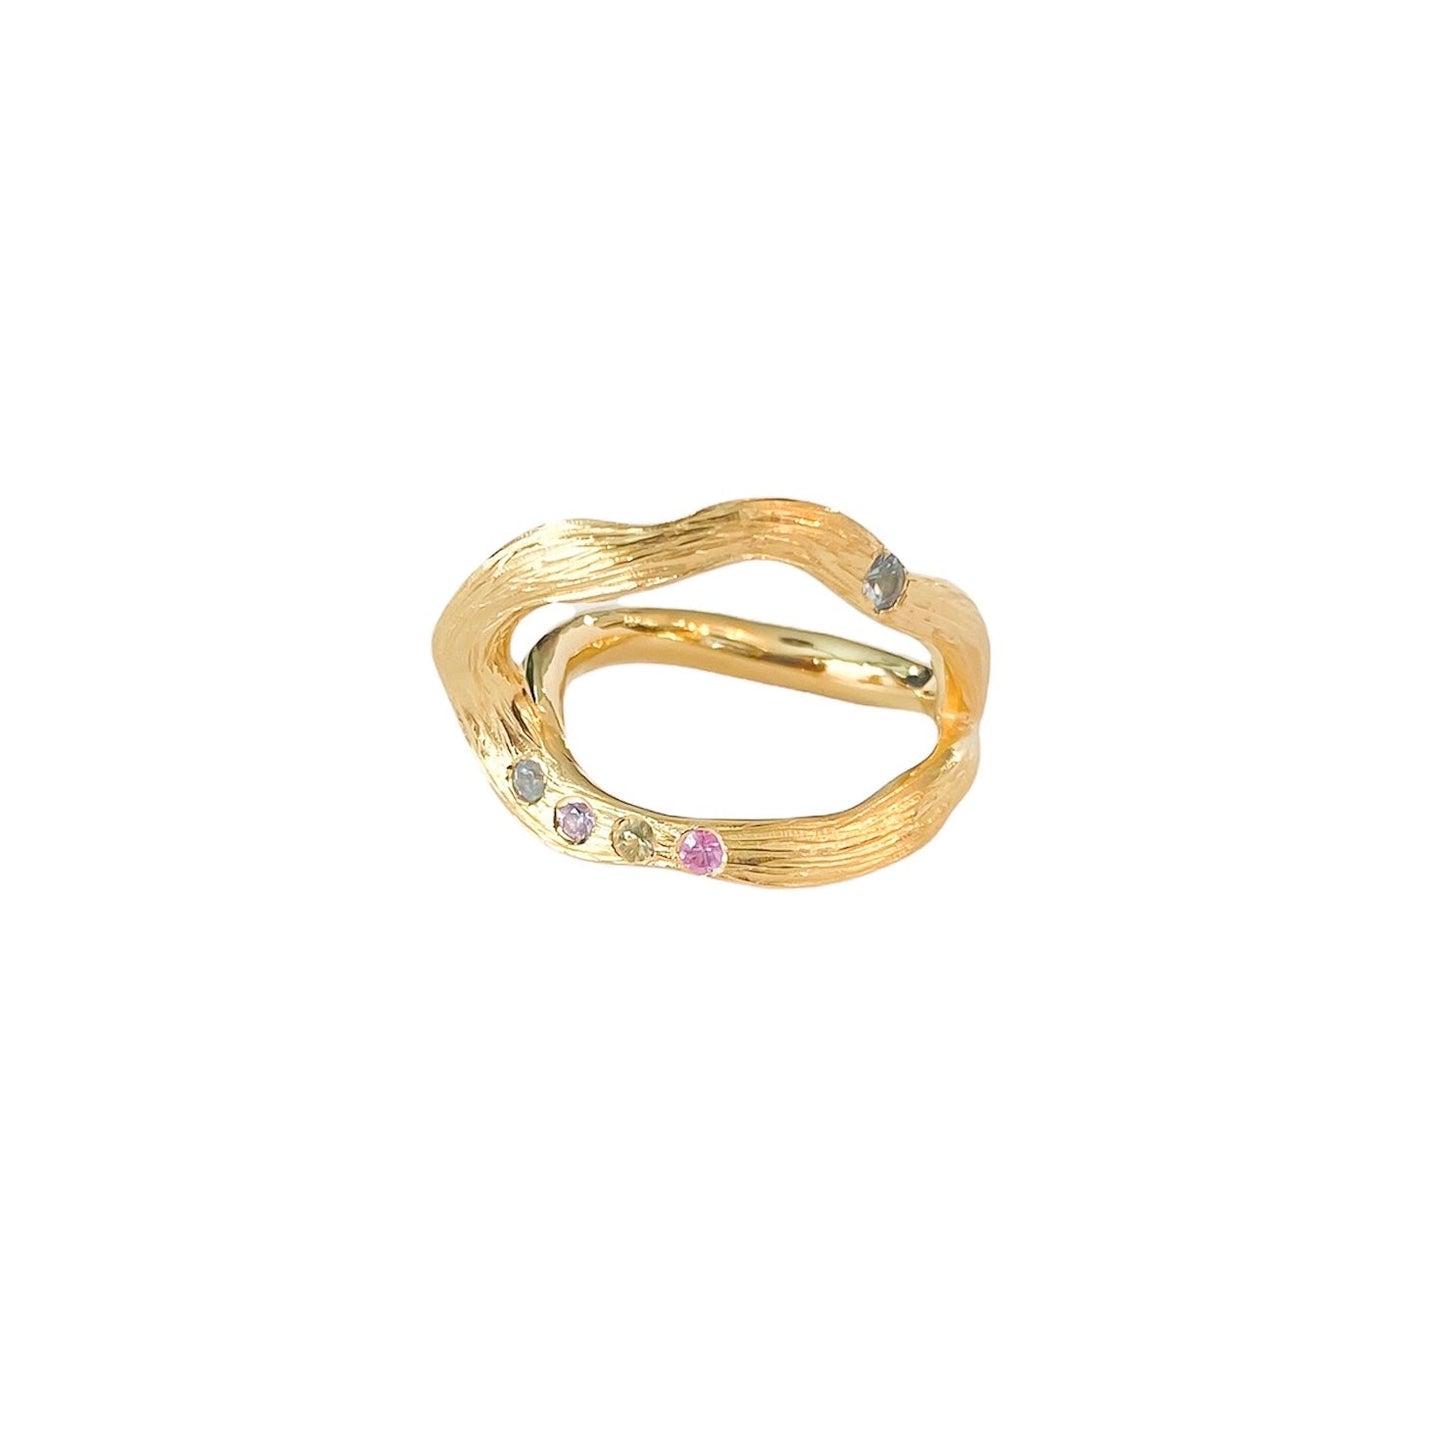 Simone Noa Oceania gold plated silver ring, top view.